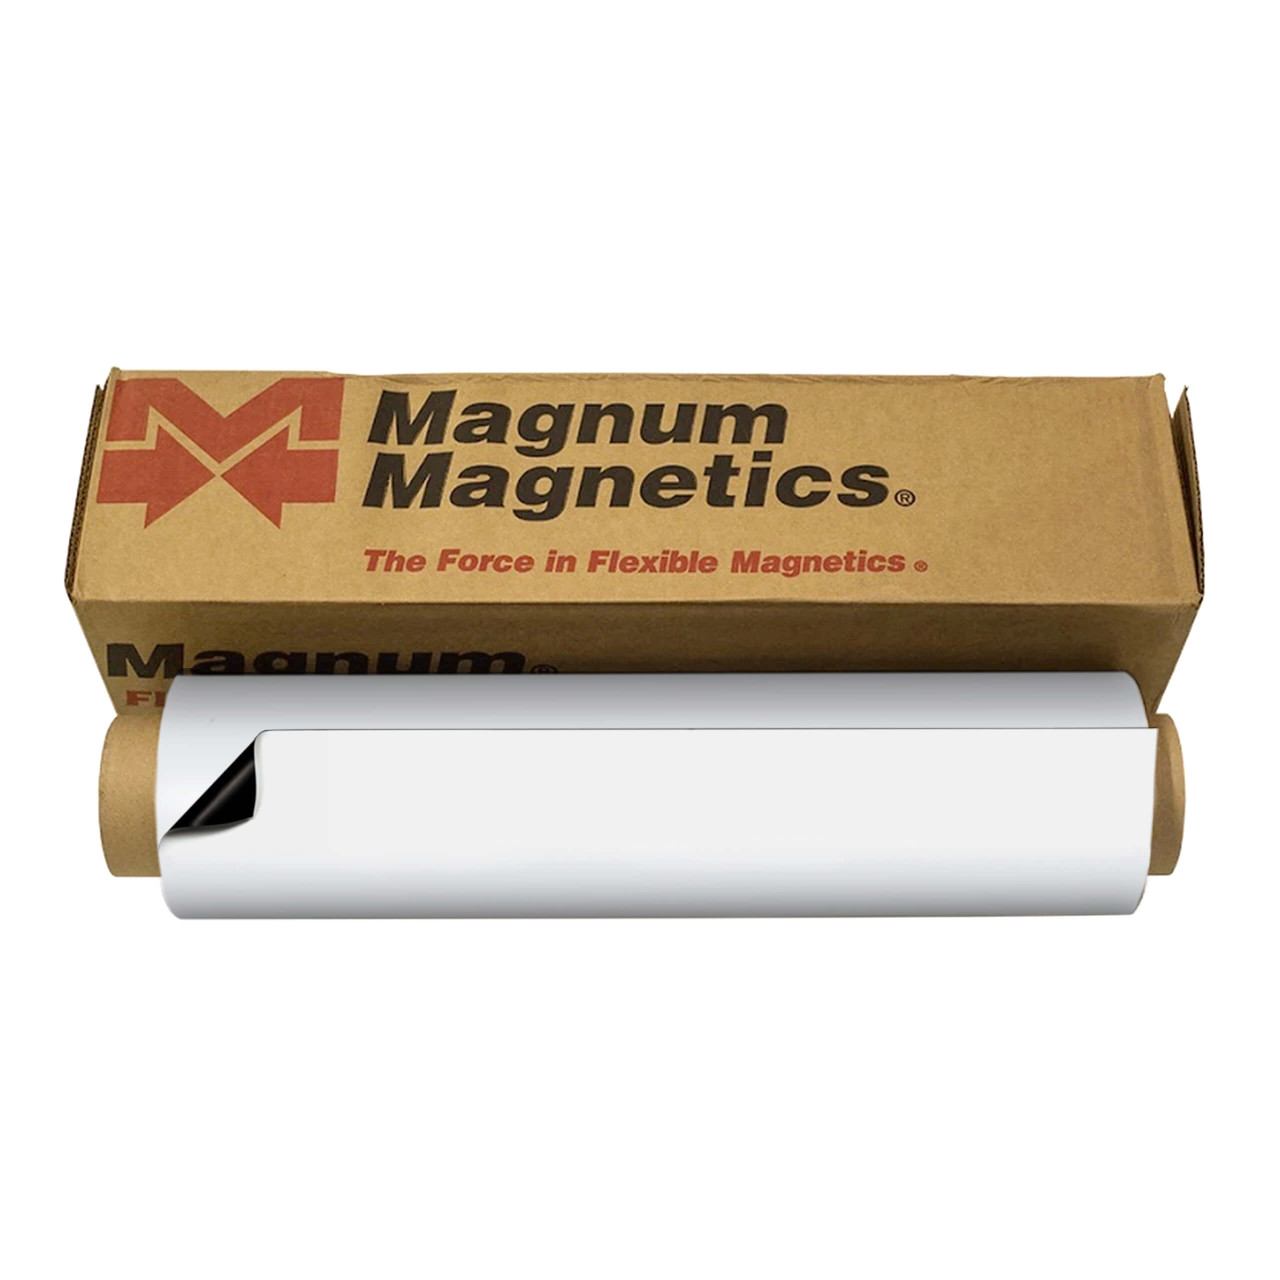 Printable Magnetic Sheets for Cars - Magnum Magnetics